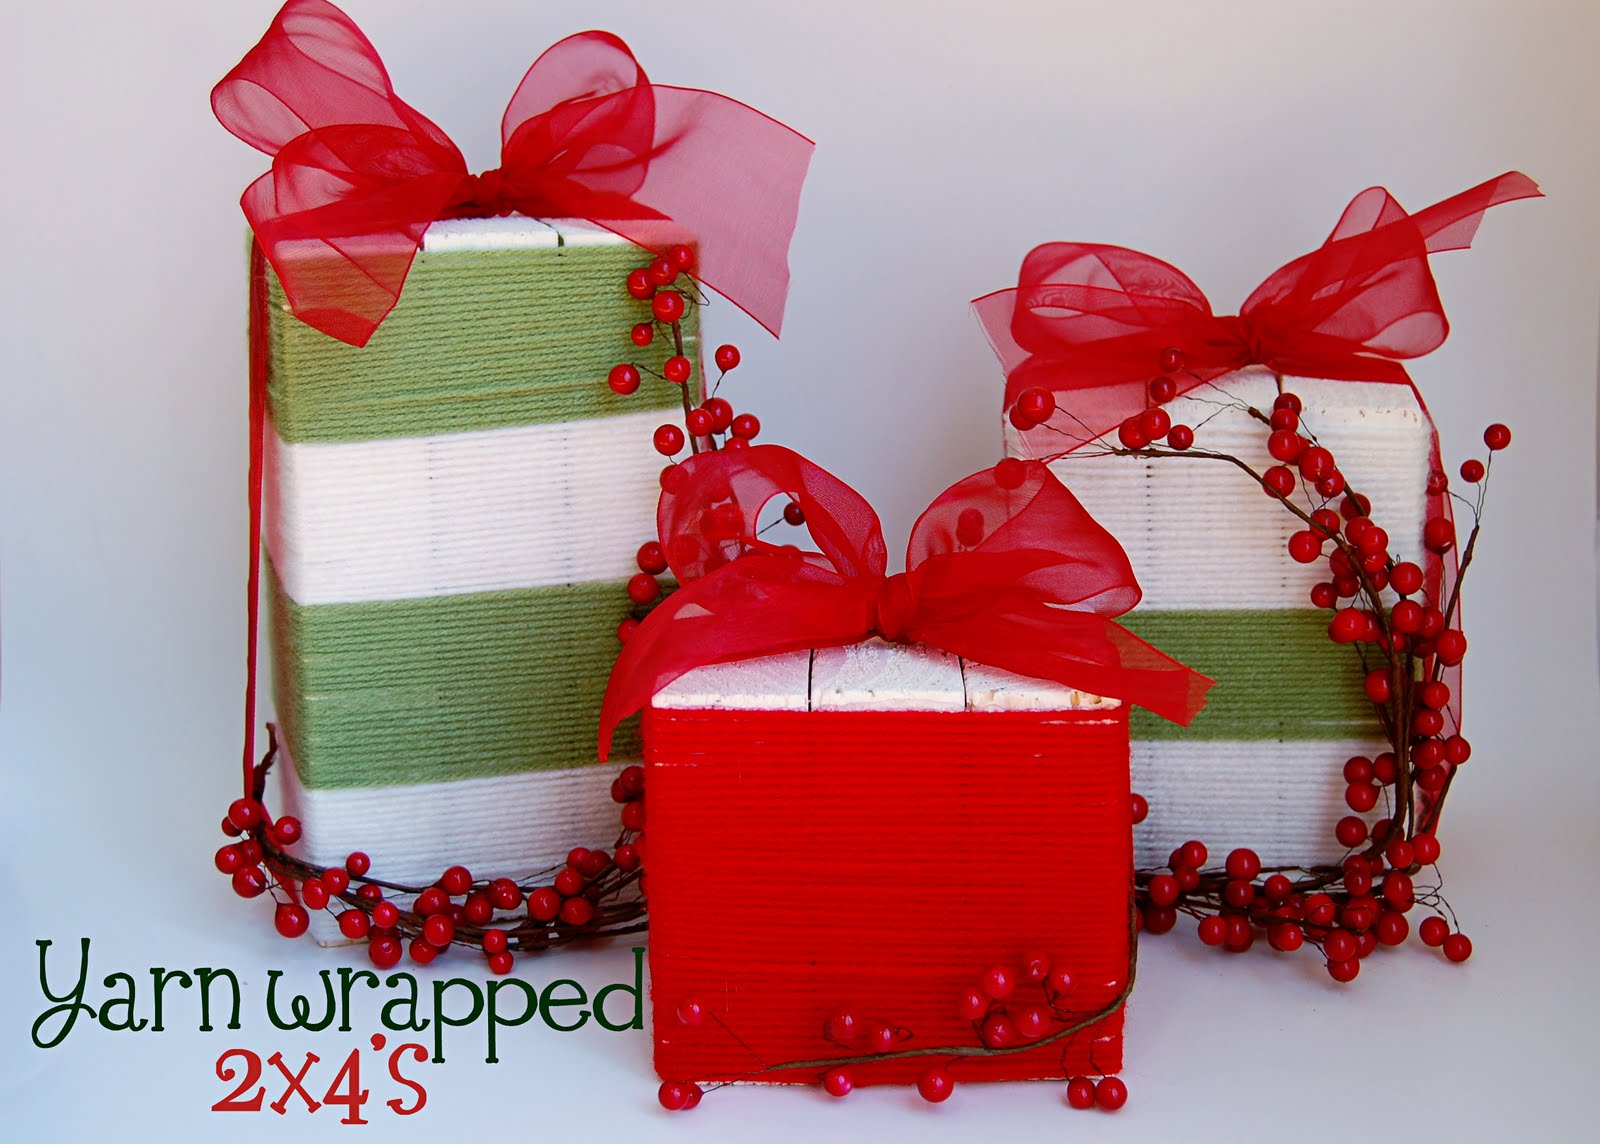 Wood Christmas Gifts that are yarn-wrapped from Lindsay of Southern ...